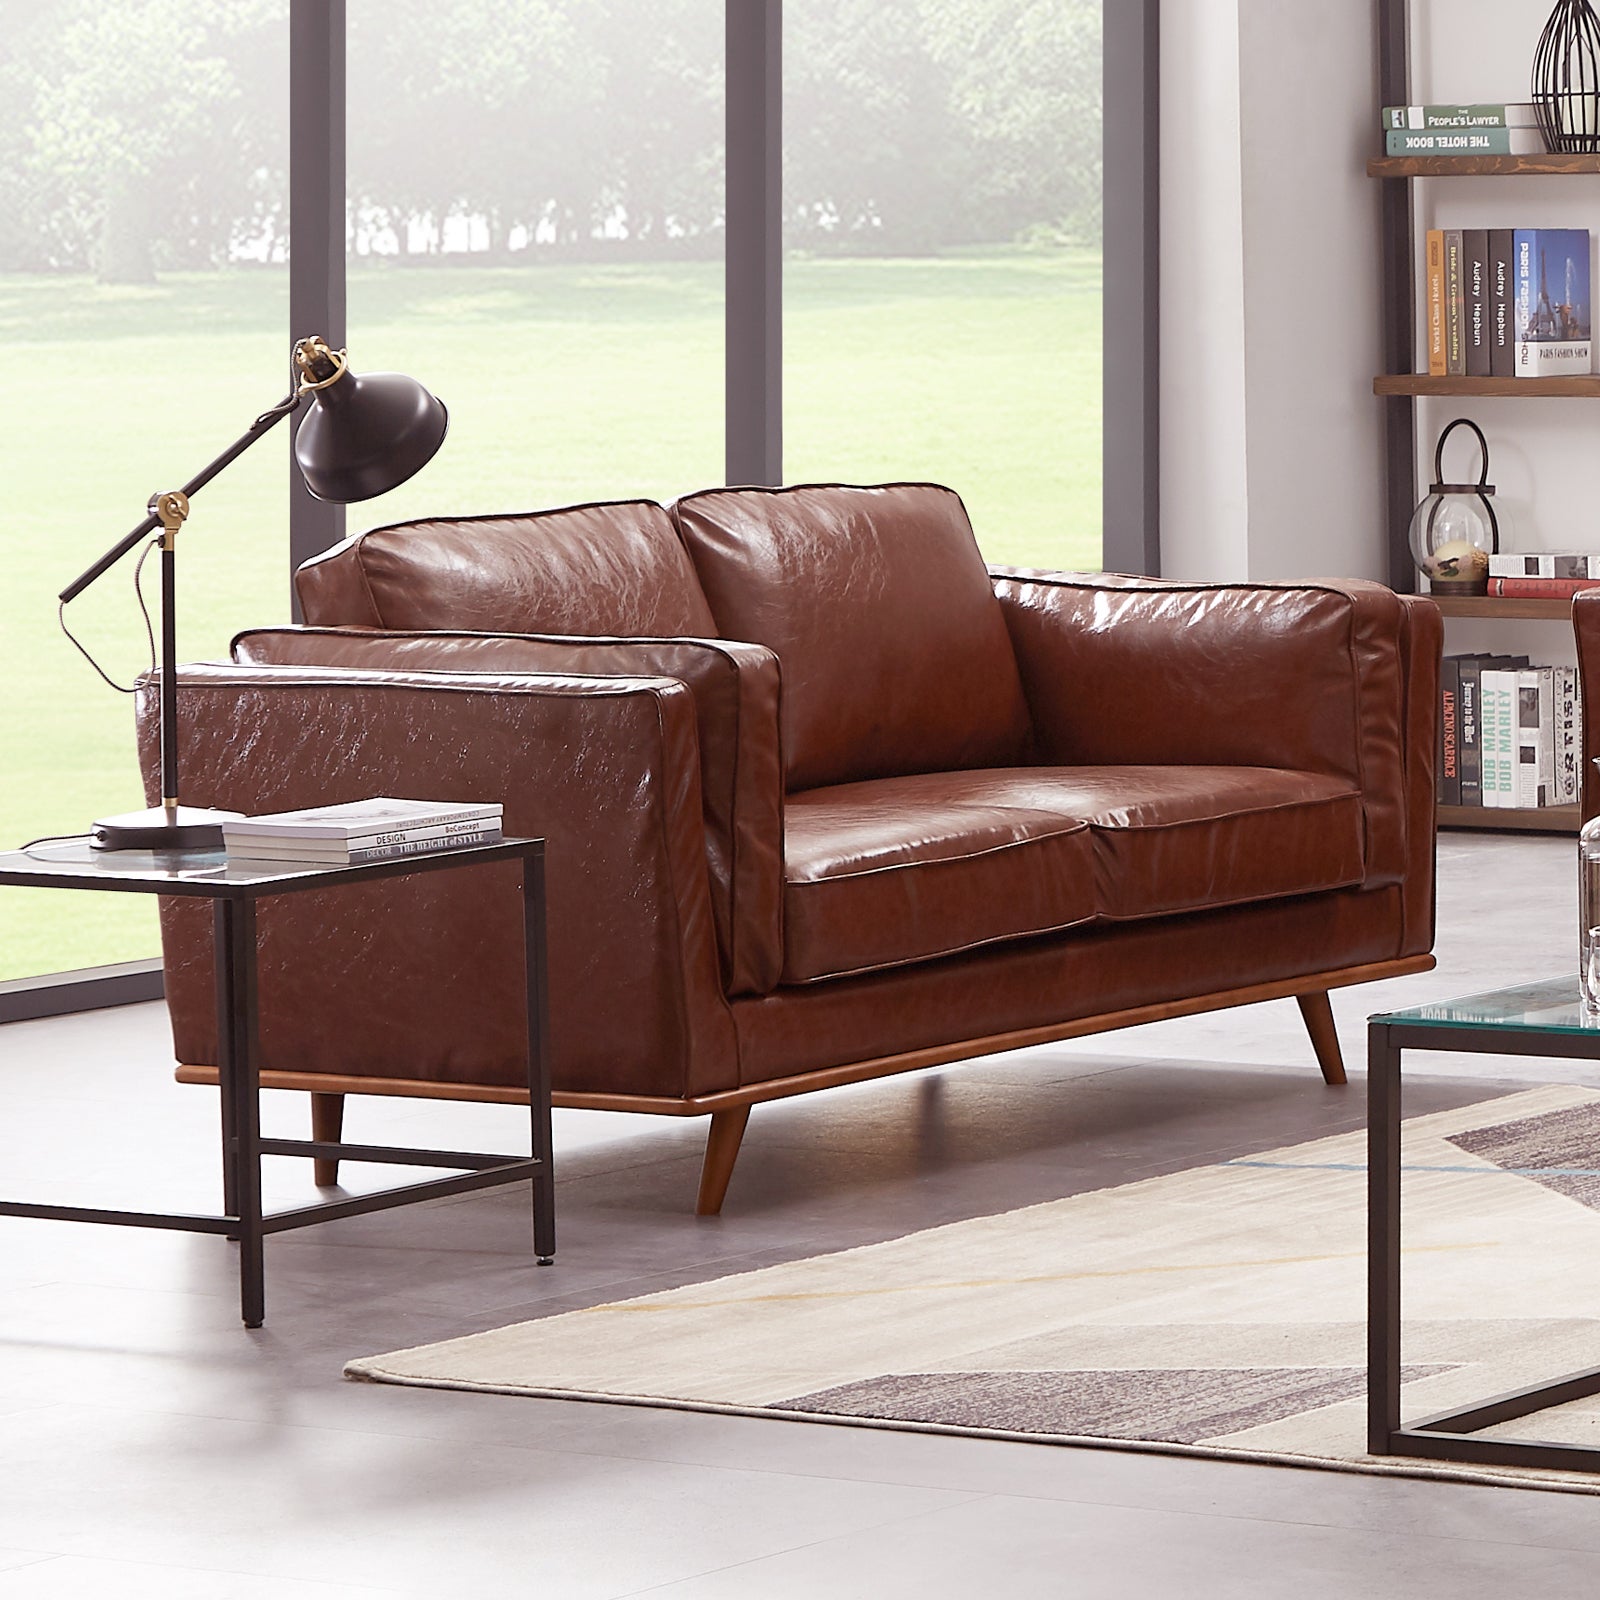 York 2 Seater PU Leather Armchair Sofa Modern Lounge in Brown Colour